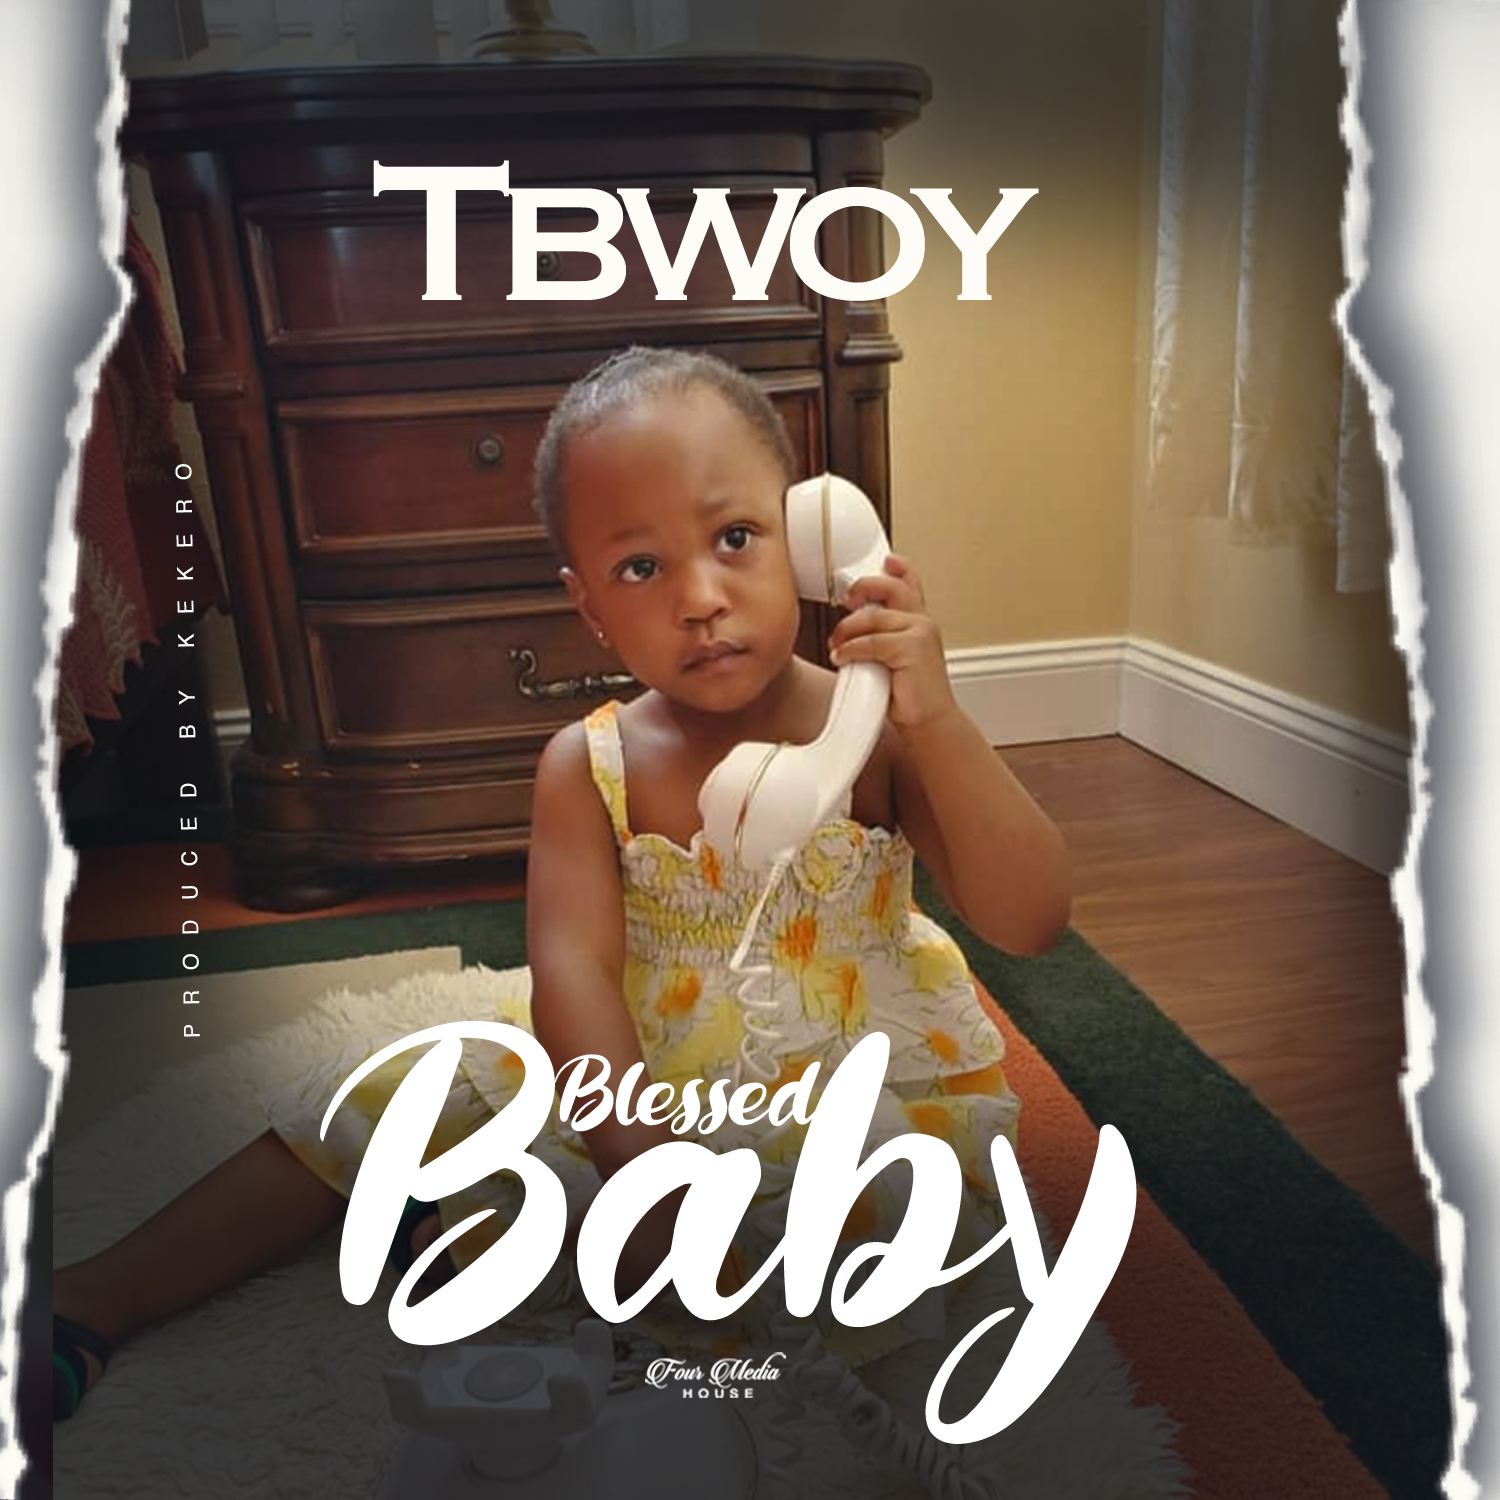 Tbwoy - "Blessed Baby" (Acoustic) [Audio]